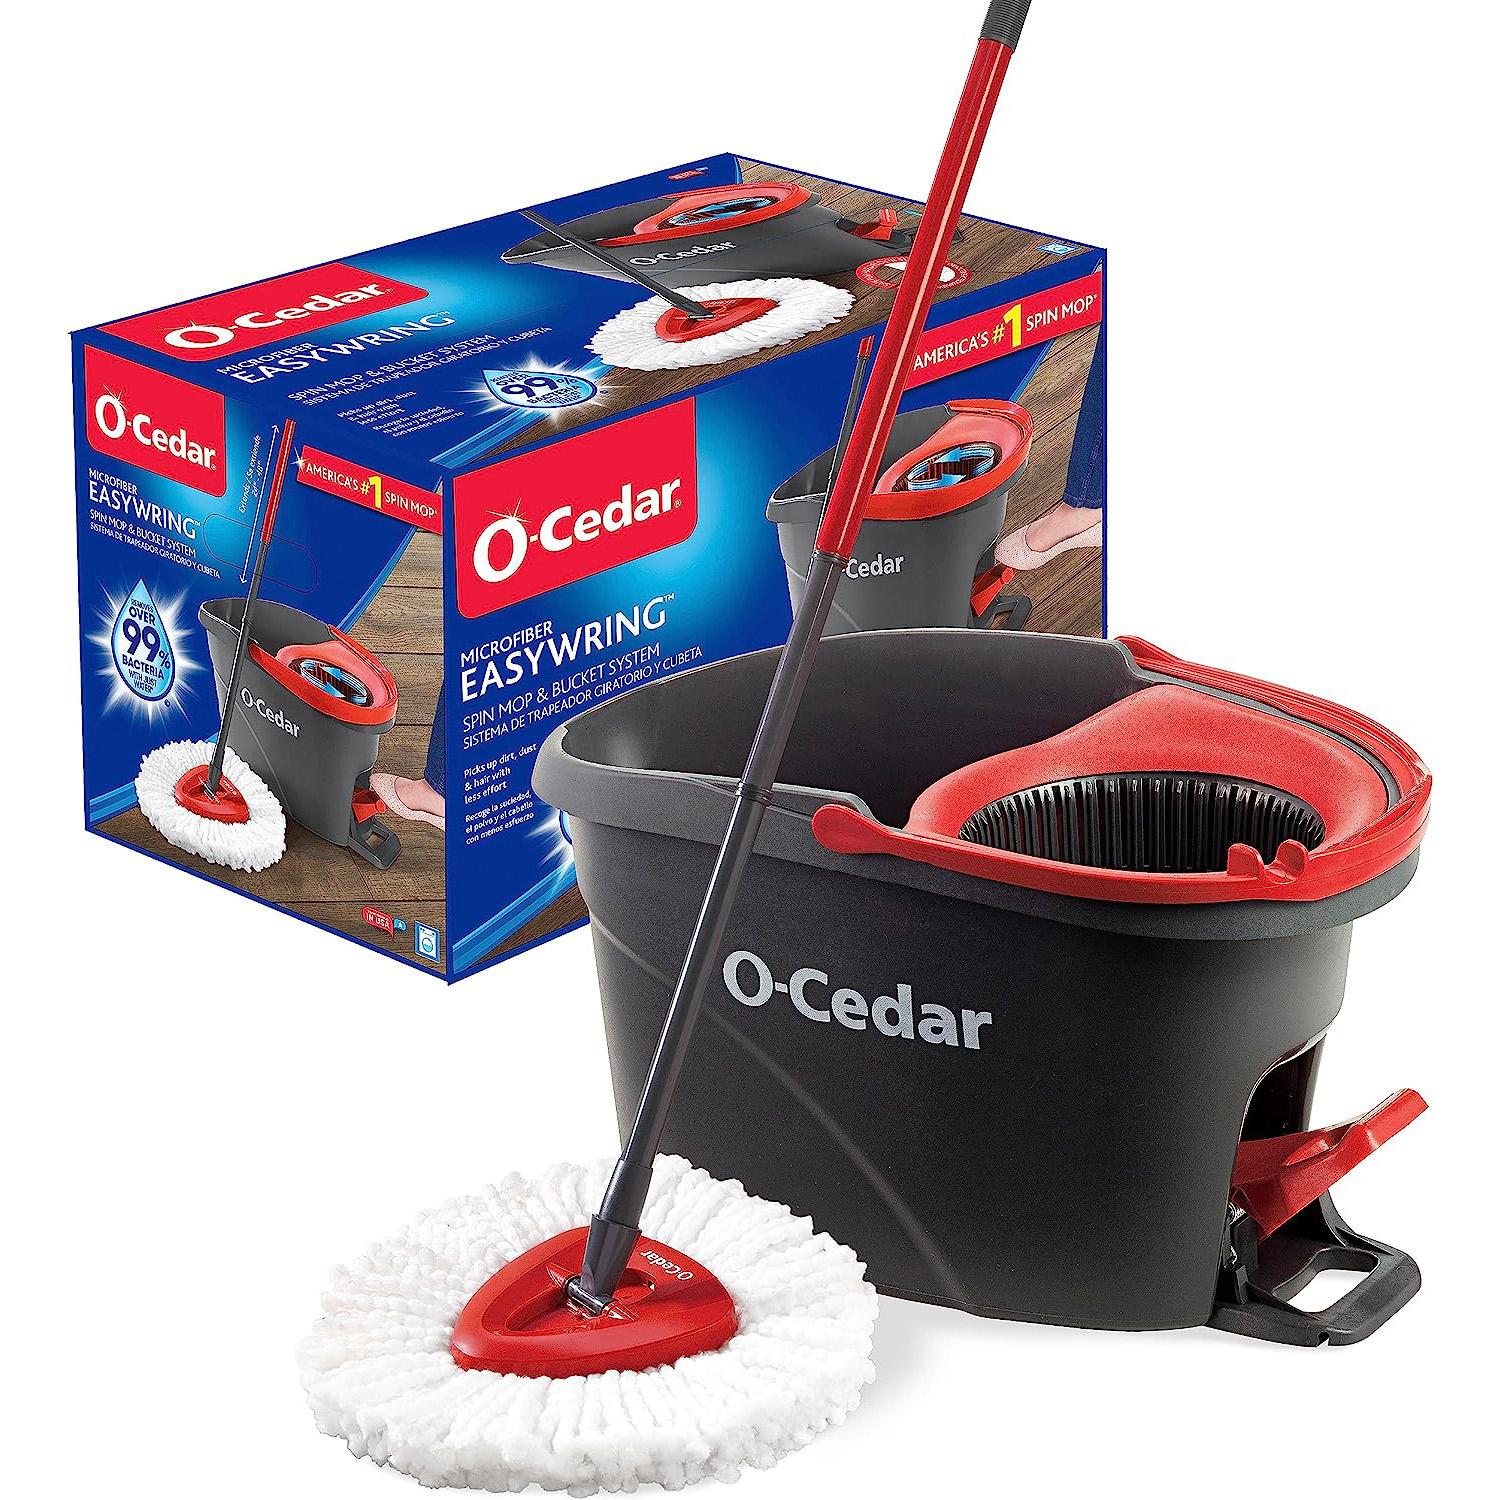 O-Cedar EasyWring Microfiber Spin Mop and Bucket System for $27.99